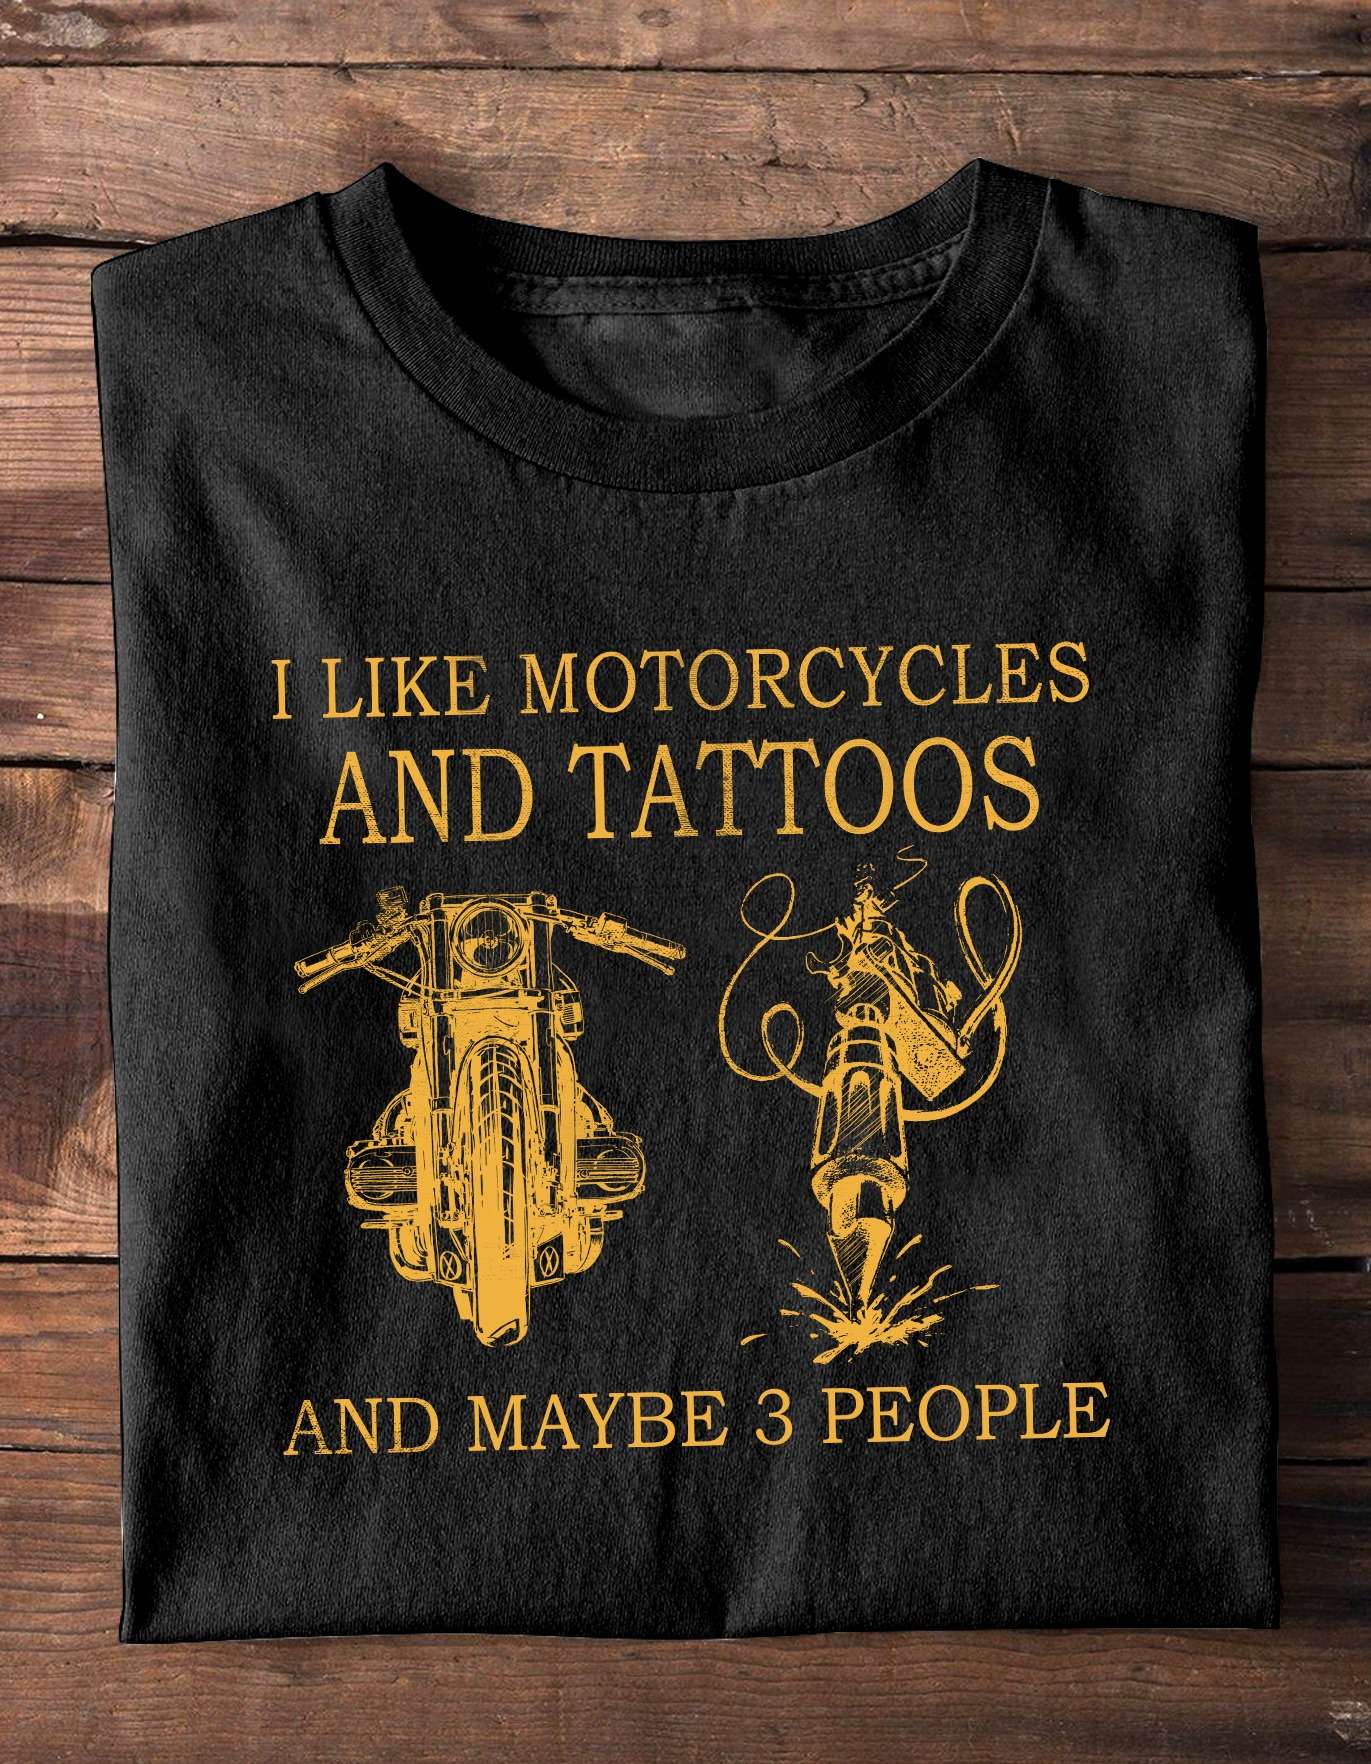 I like motorcycles and tattoos and maybe 3 people - Tattoo person